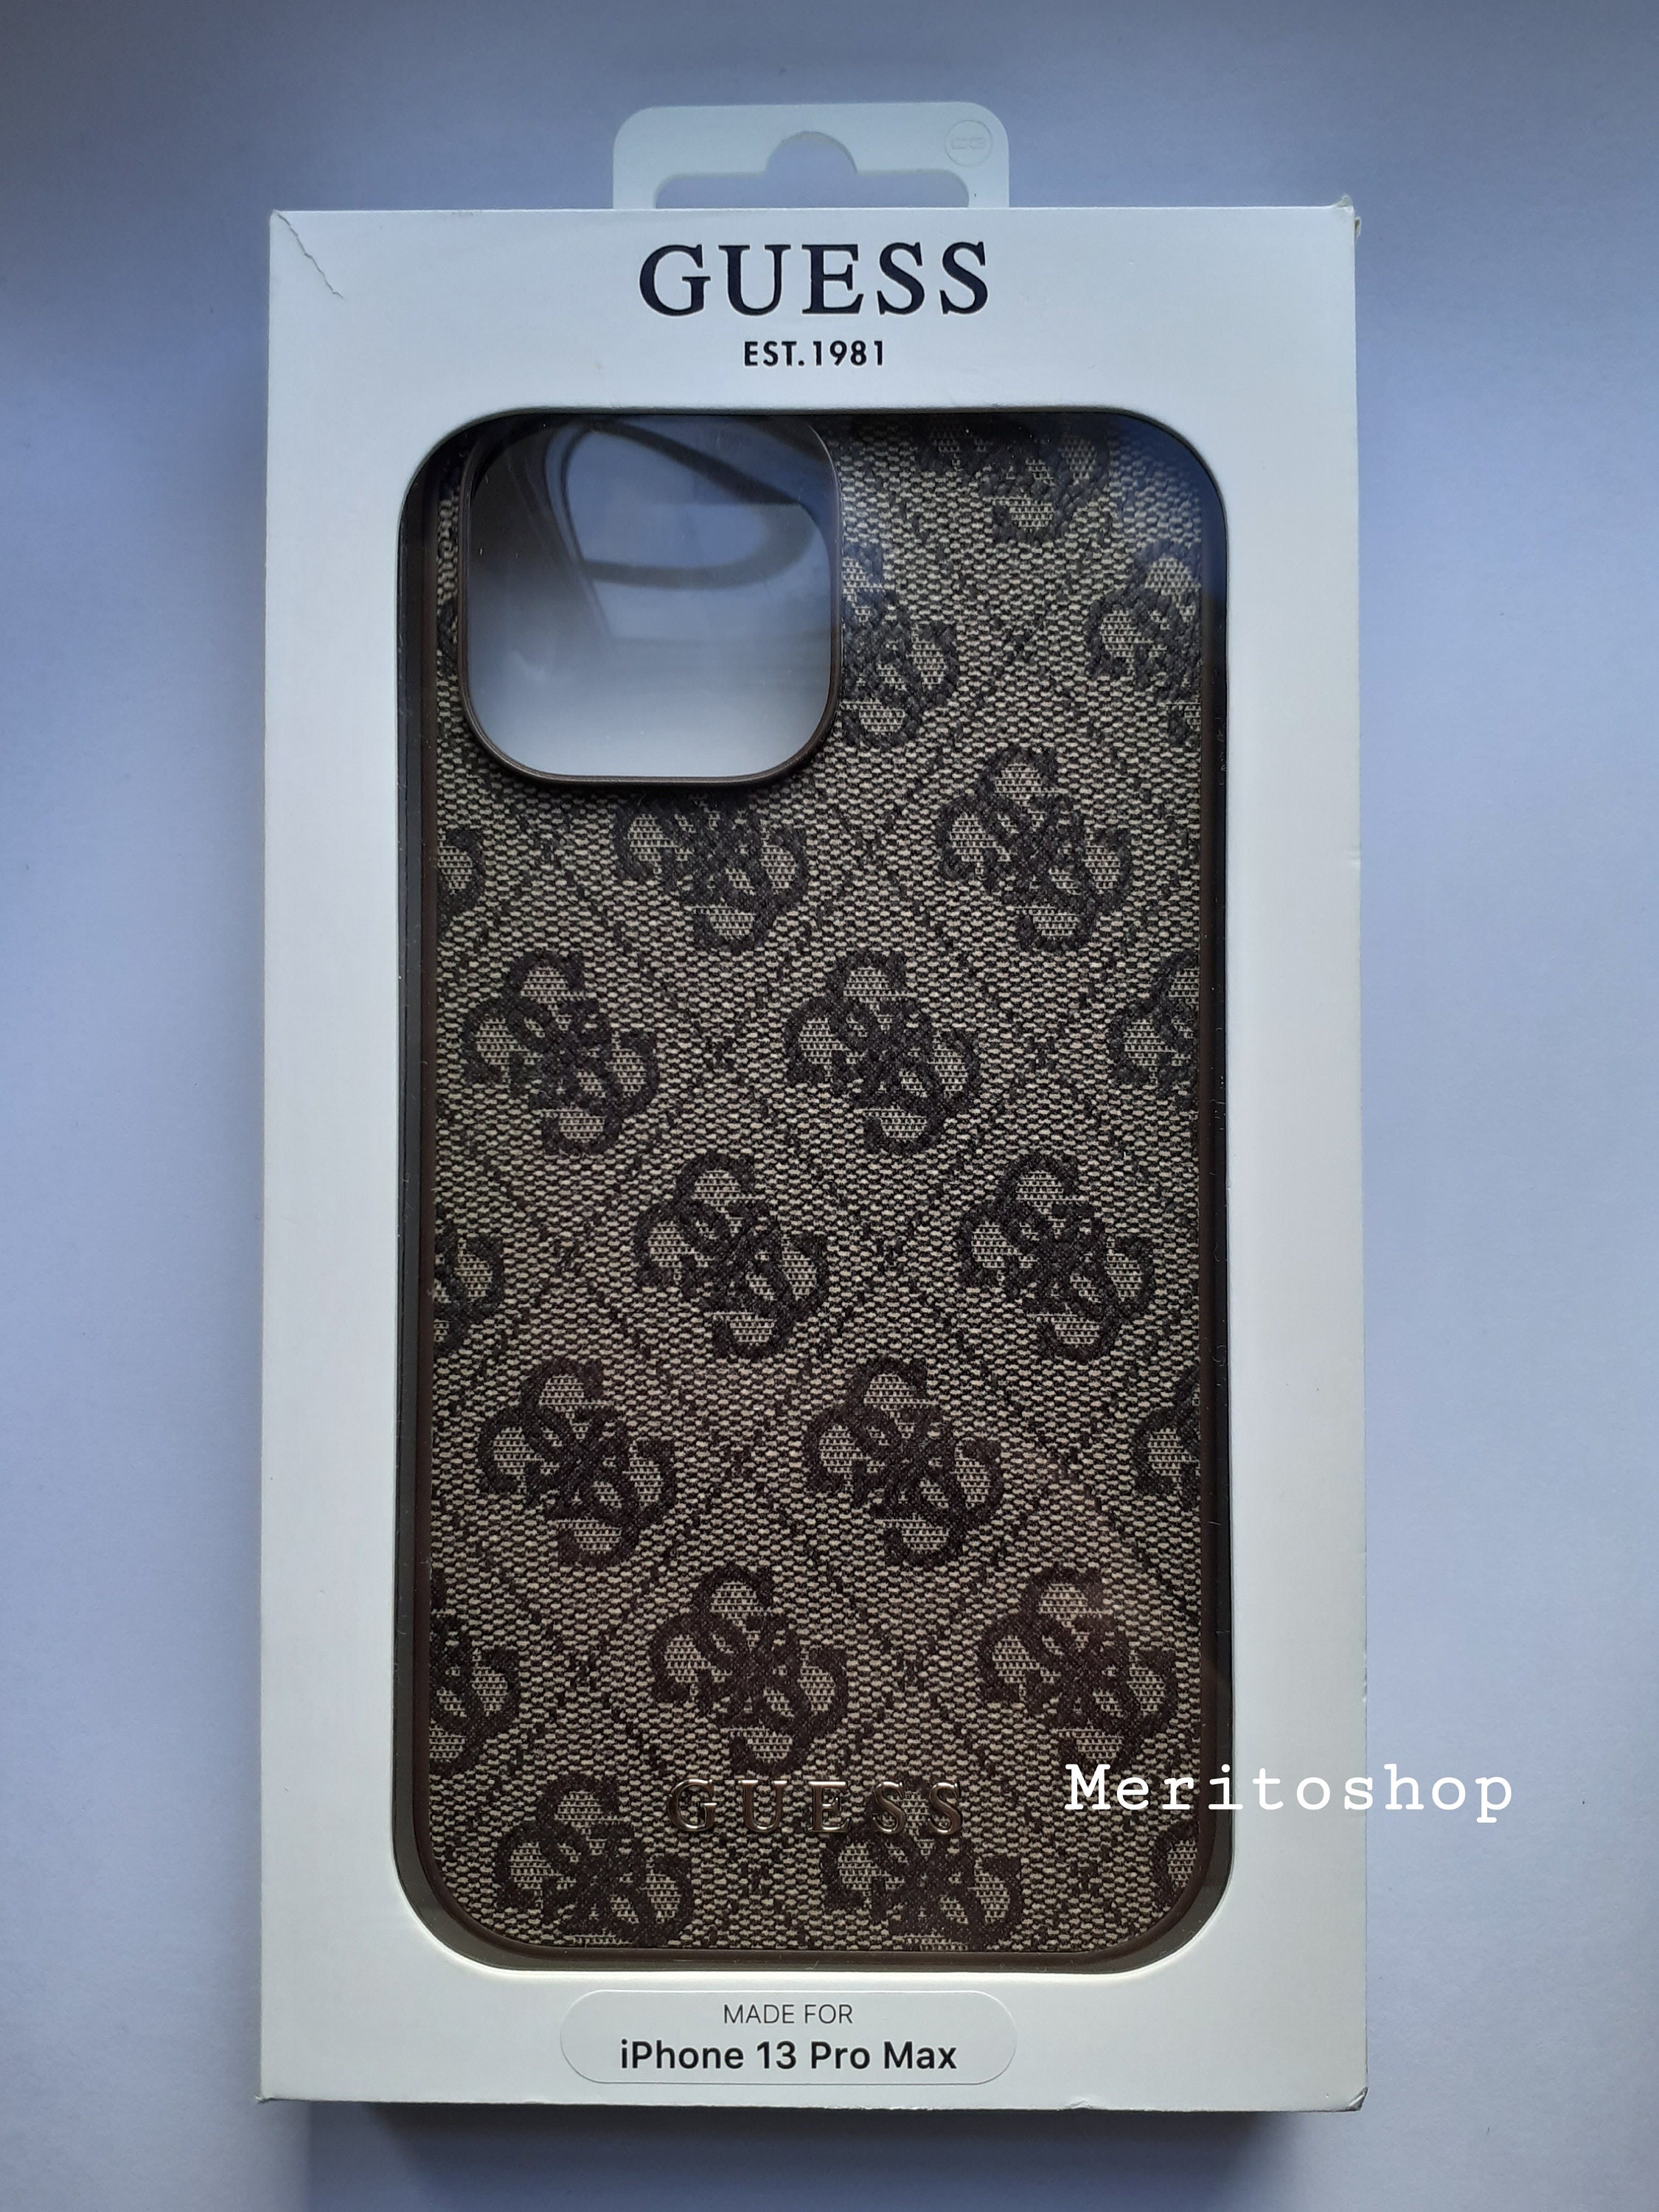 raid Kvadrant reaktion Guess Apple Iphone 13 Pro Max Brown Back Cover Case - Etsy